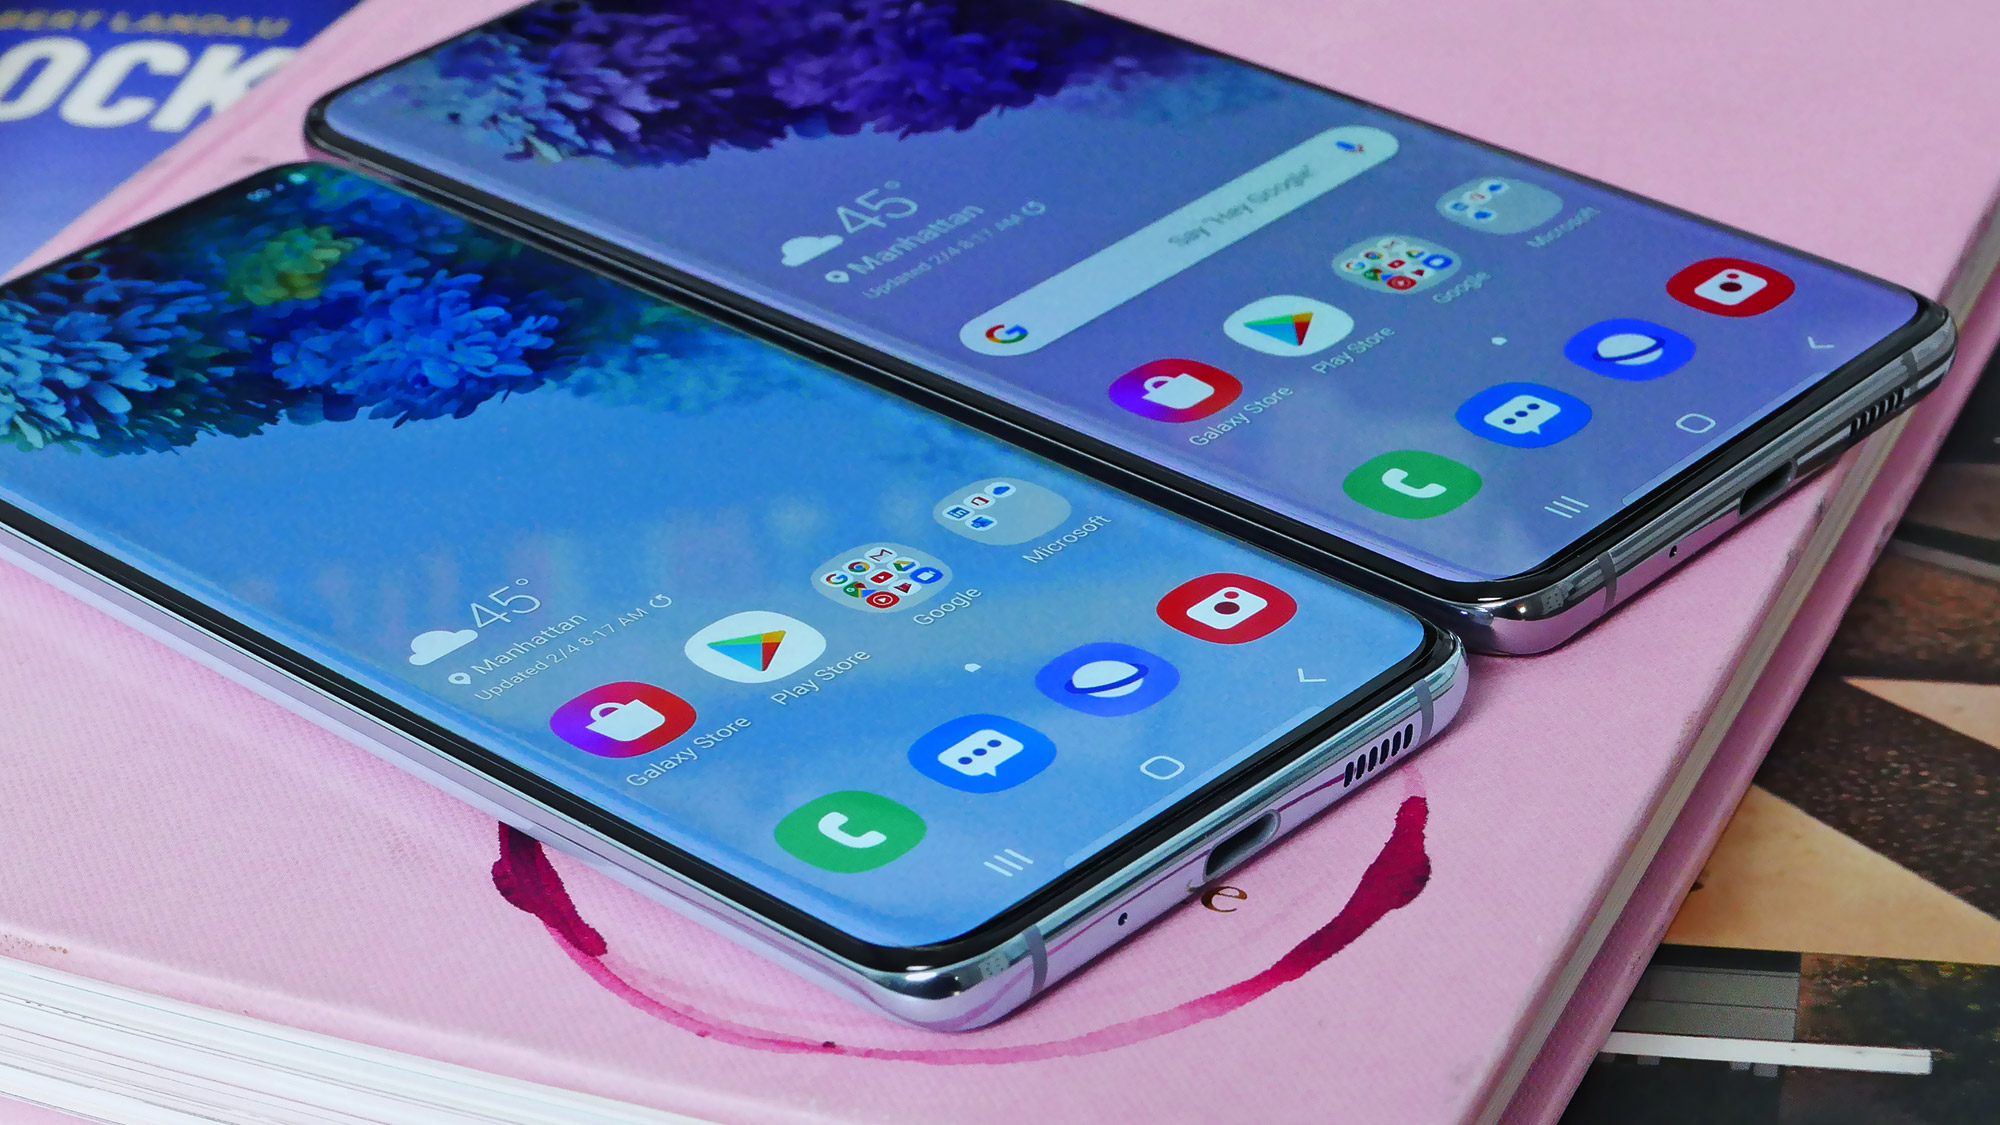 Galaxy S20 vs iPhone 11 Which phone should you buy? Tom's Guide